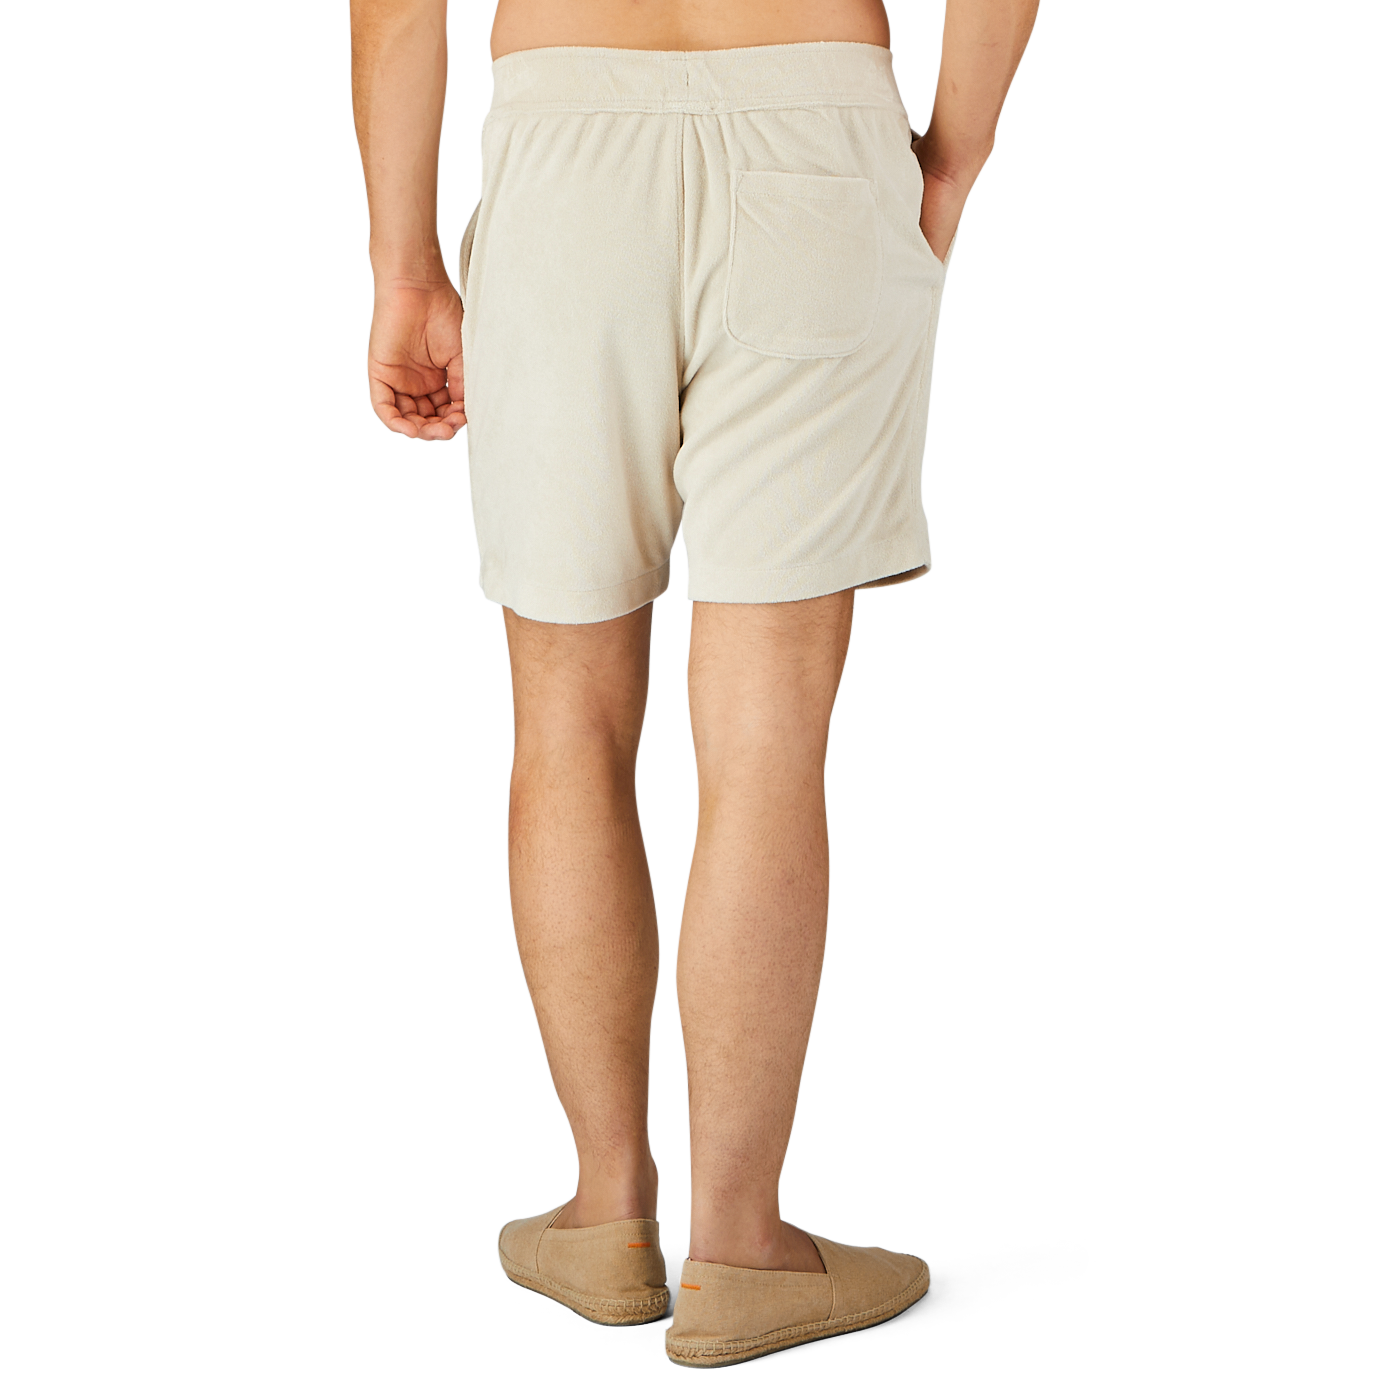 Back view of a person wearing Paige's Cream Beige Cotton Towelling Shorts with a drawstring waist and beige slip-on shoes, standing against a light gray background.